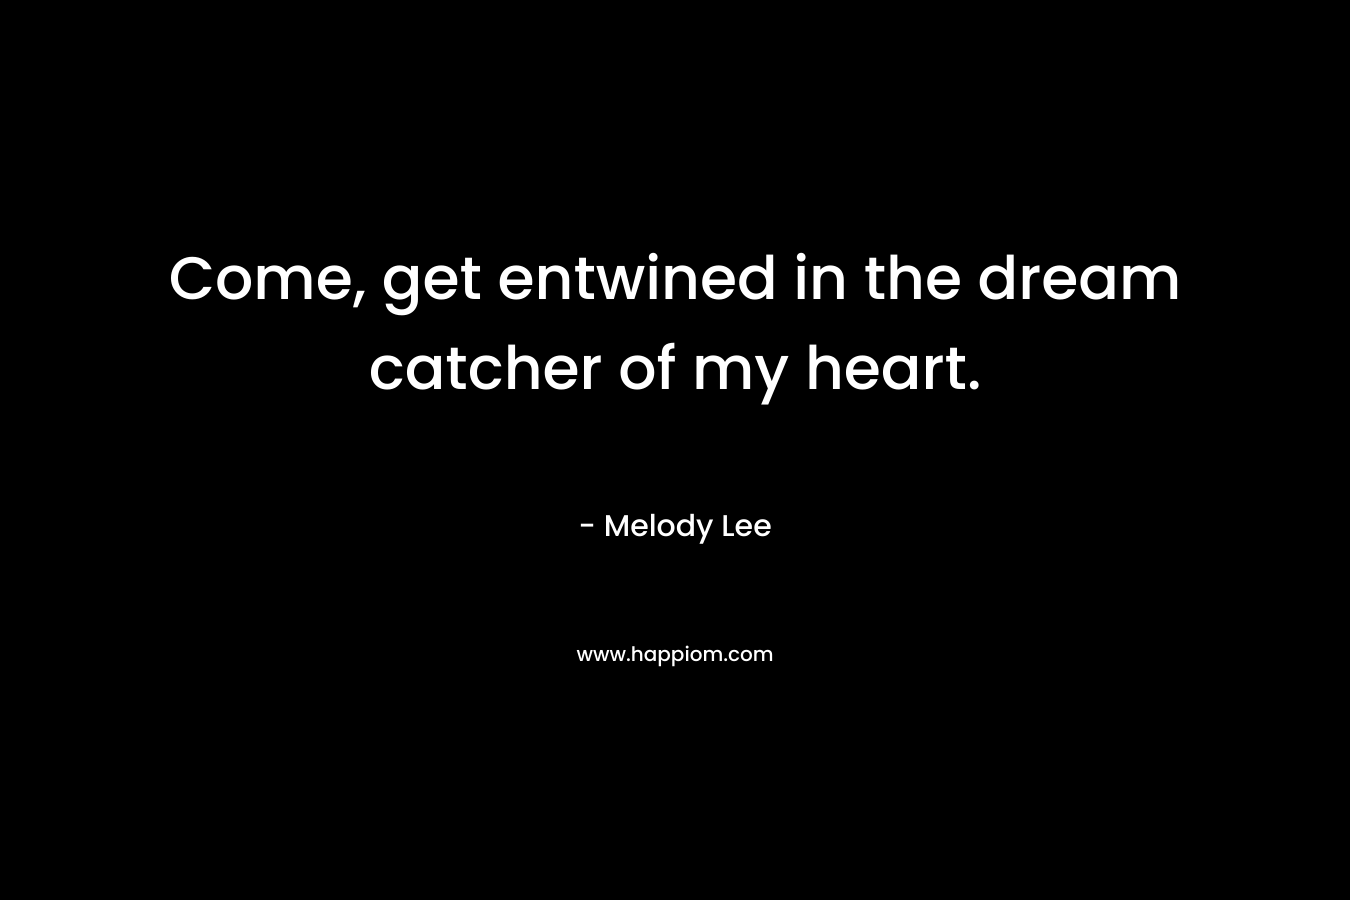 Come, get entwined in the dream catcher of my heart.